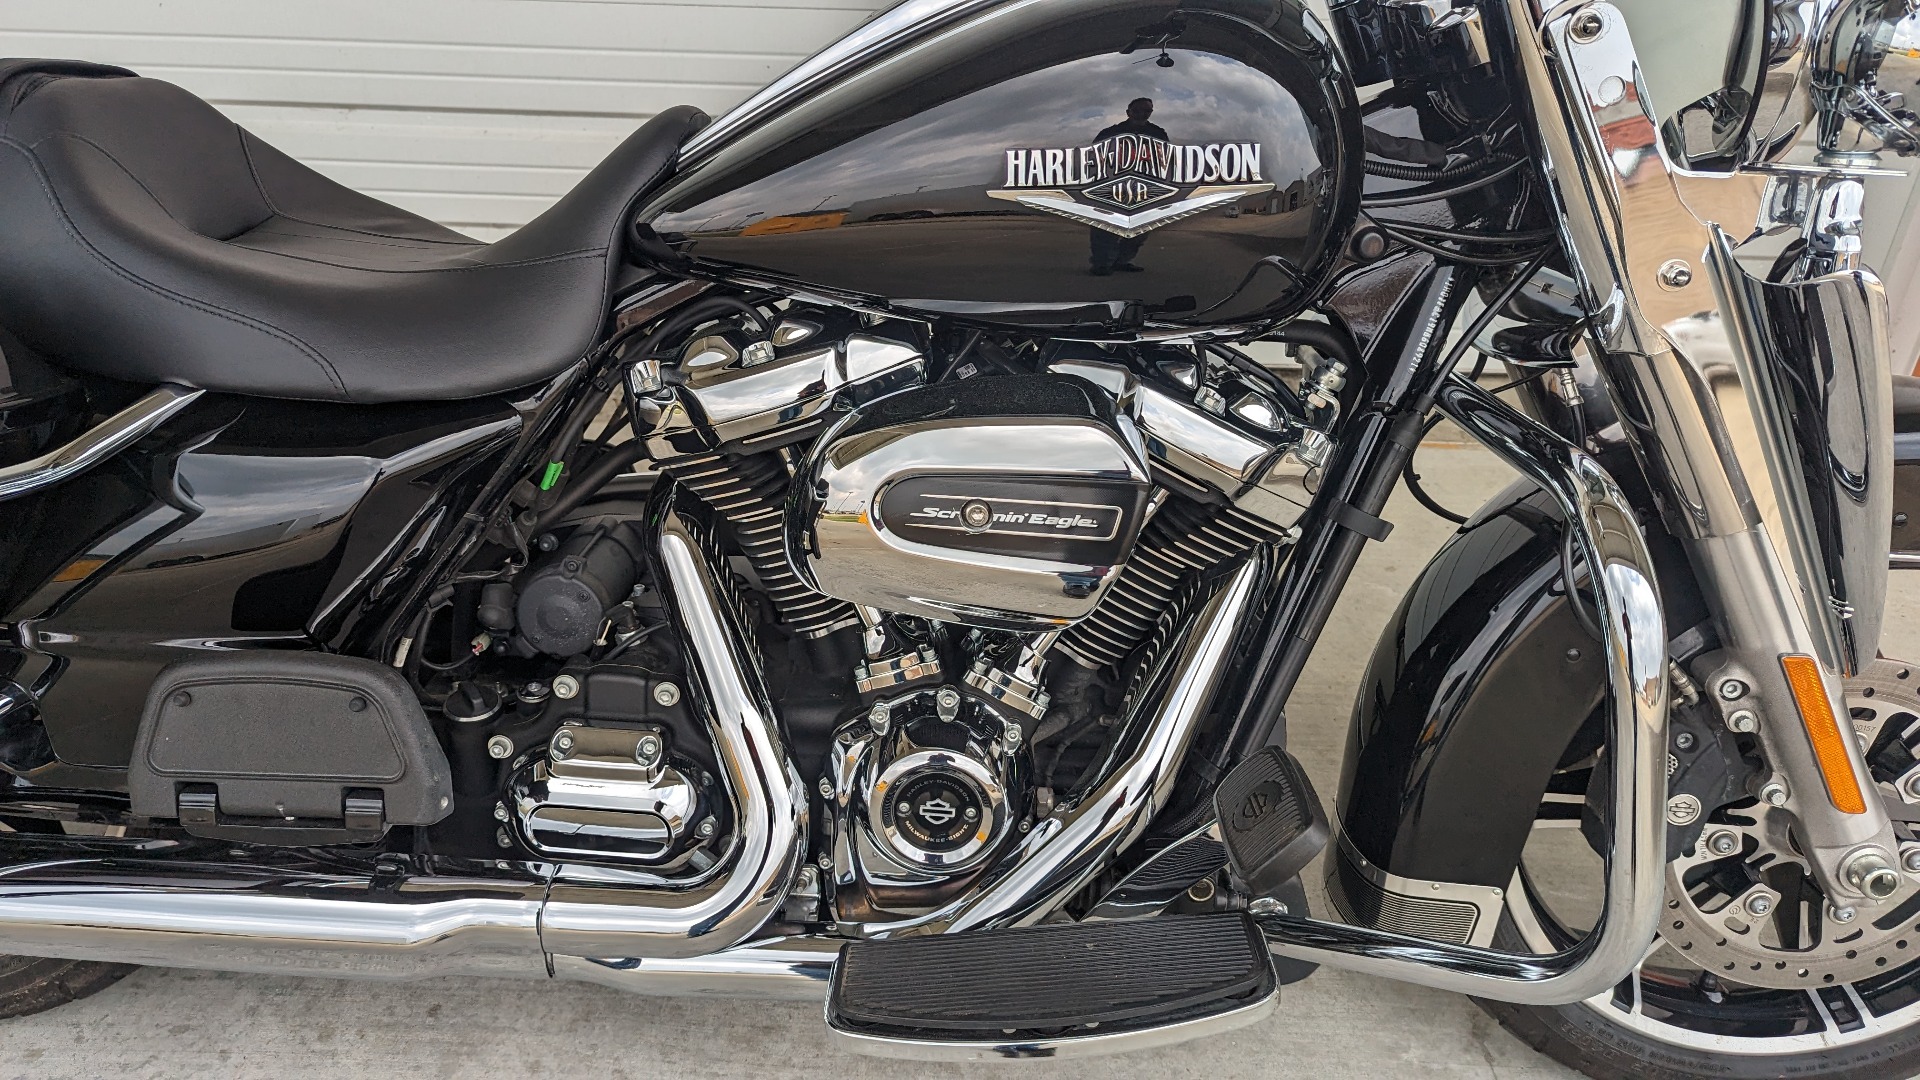 2021 harley-davidson road king with cam for sale in mississippi - Photo 4